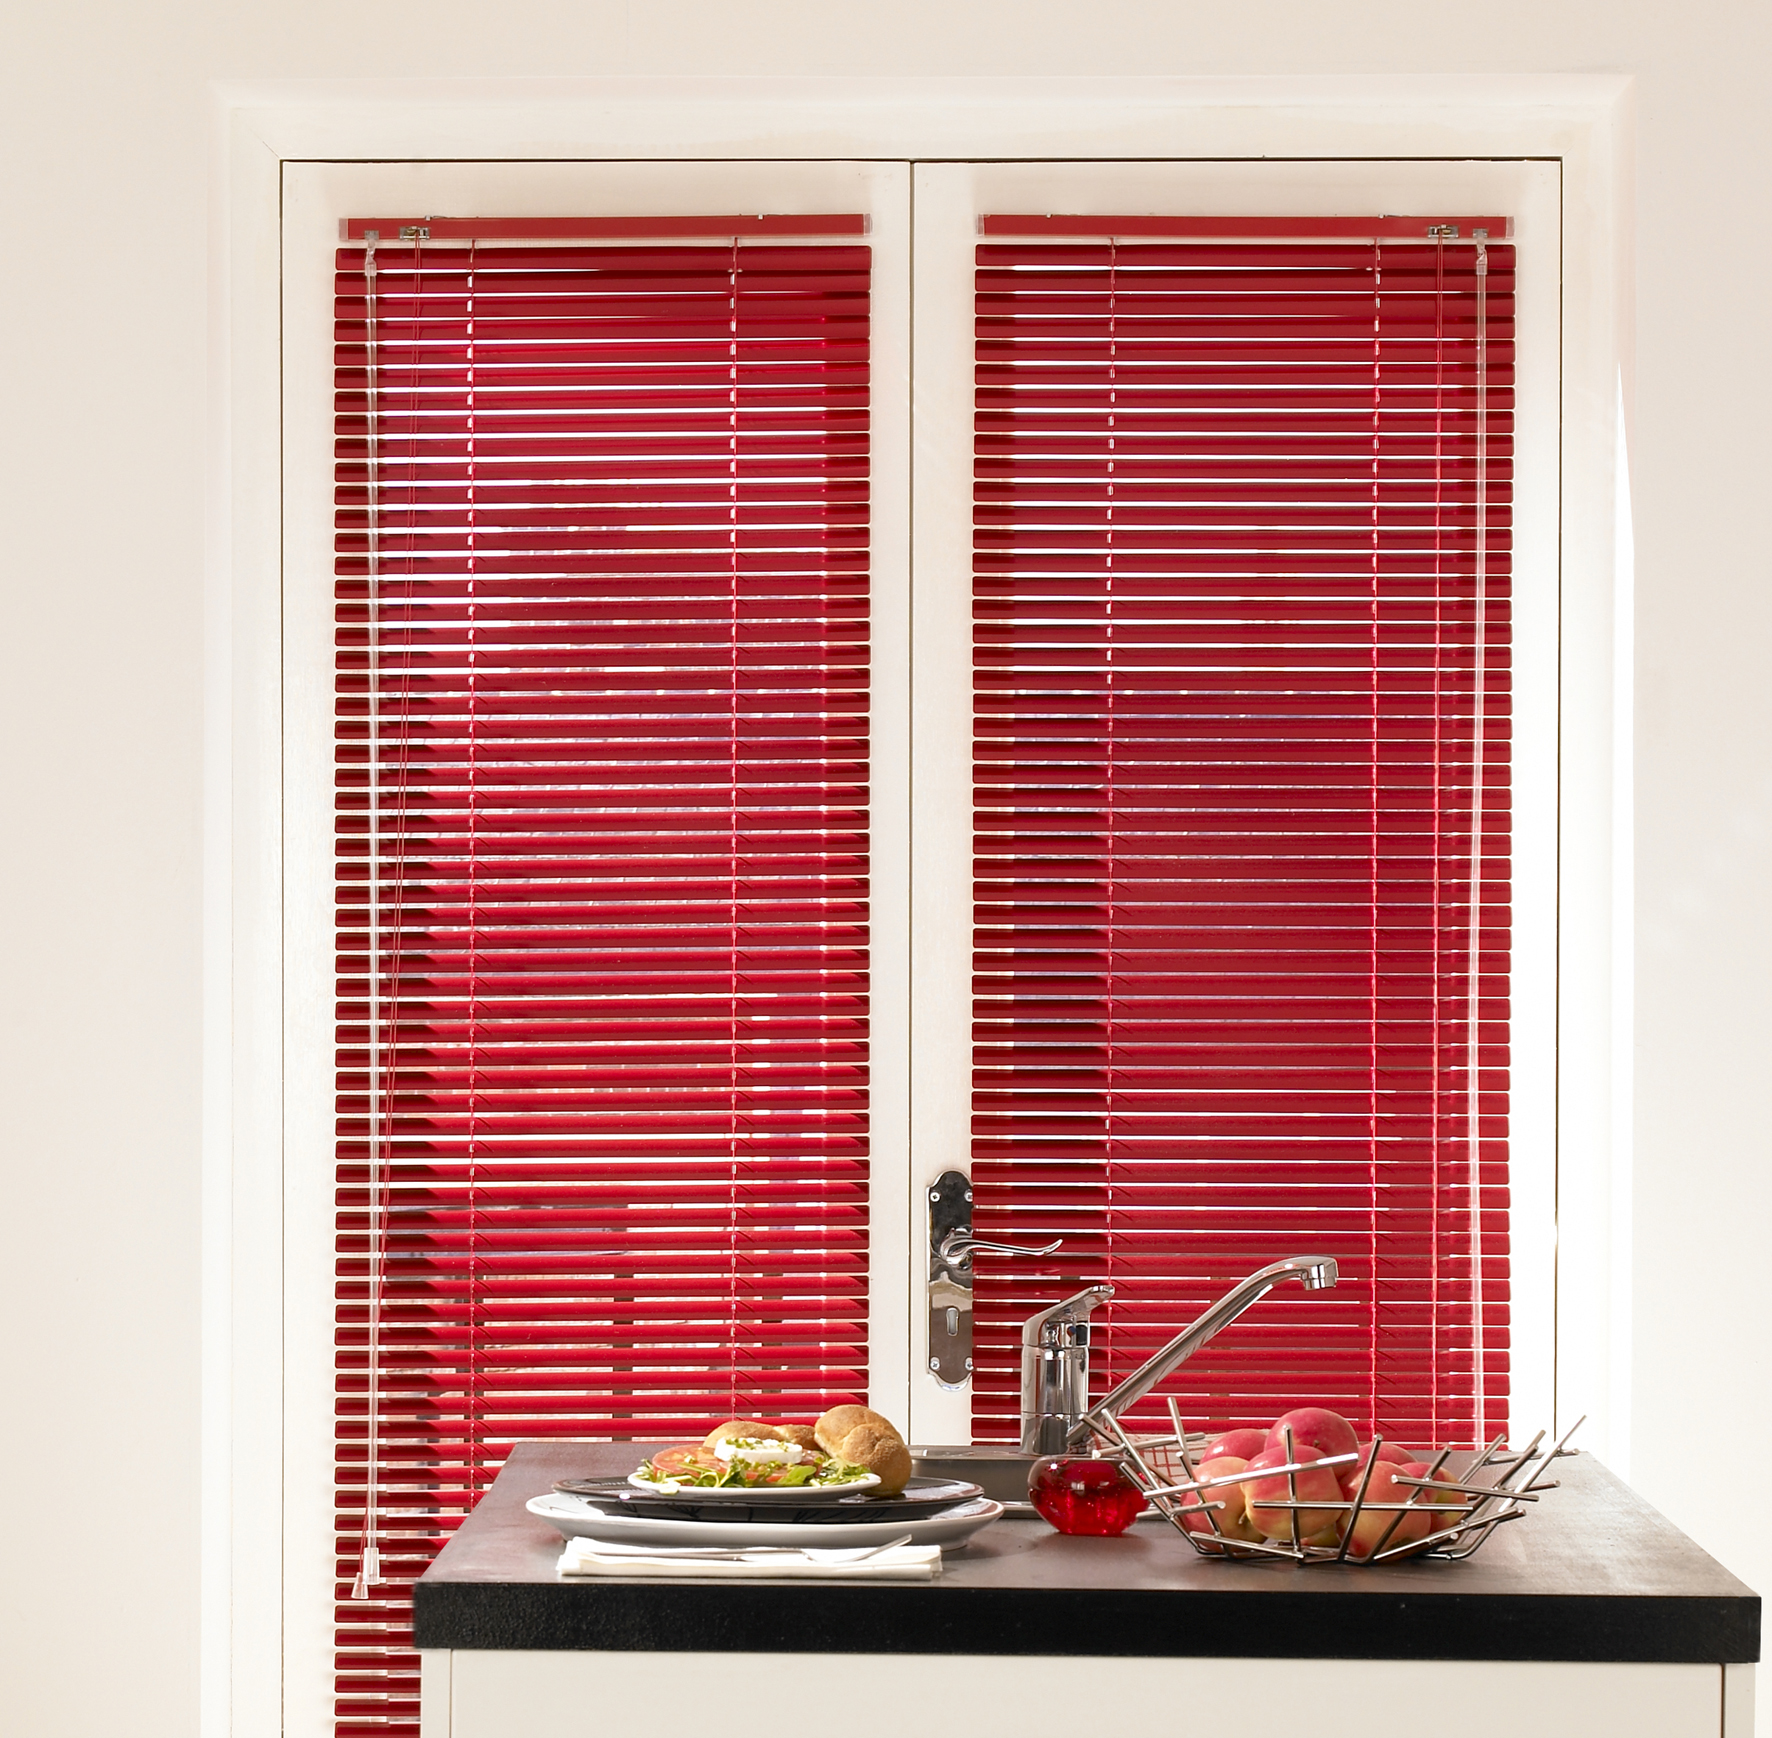 Choosing the Right Blinds for Your Home Perfect Fit Blinds vs InTu Venetian Blinds